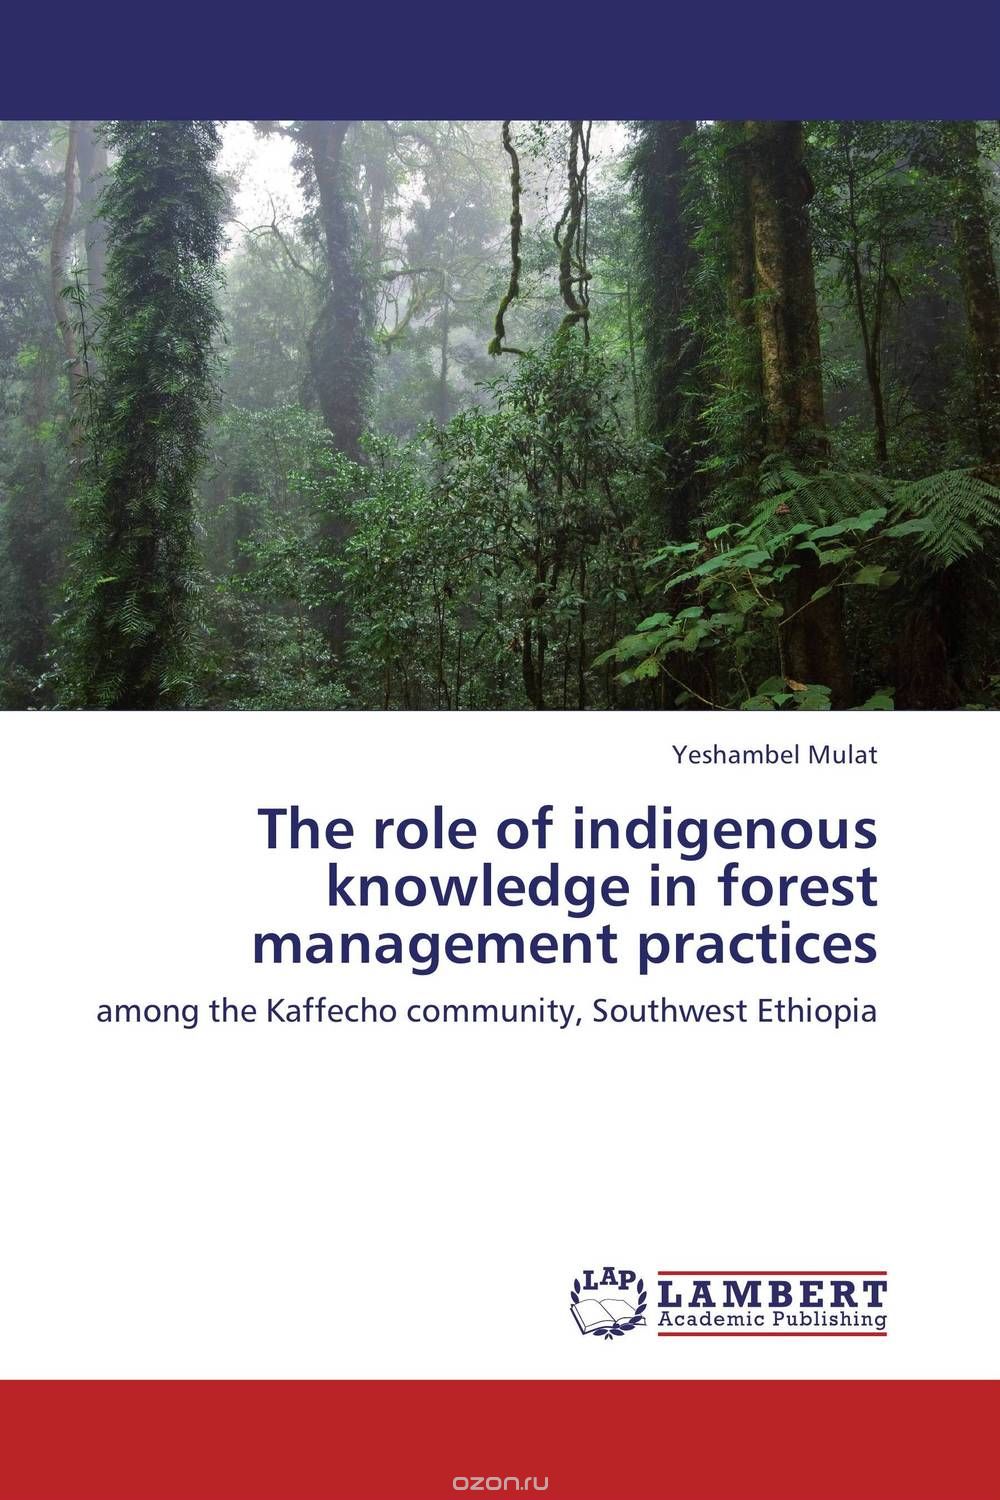 Скачать книгу "The role of indigenous knowledge in forest management practices"